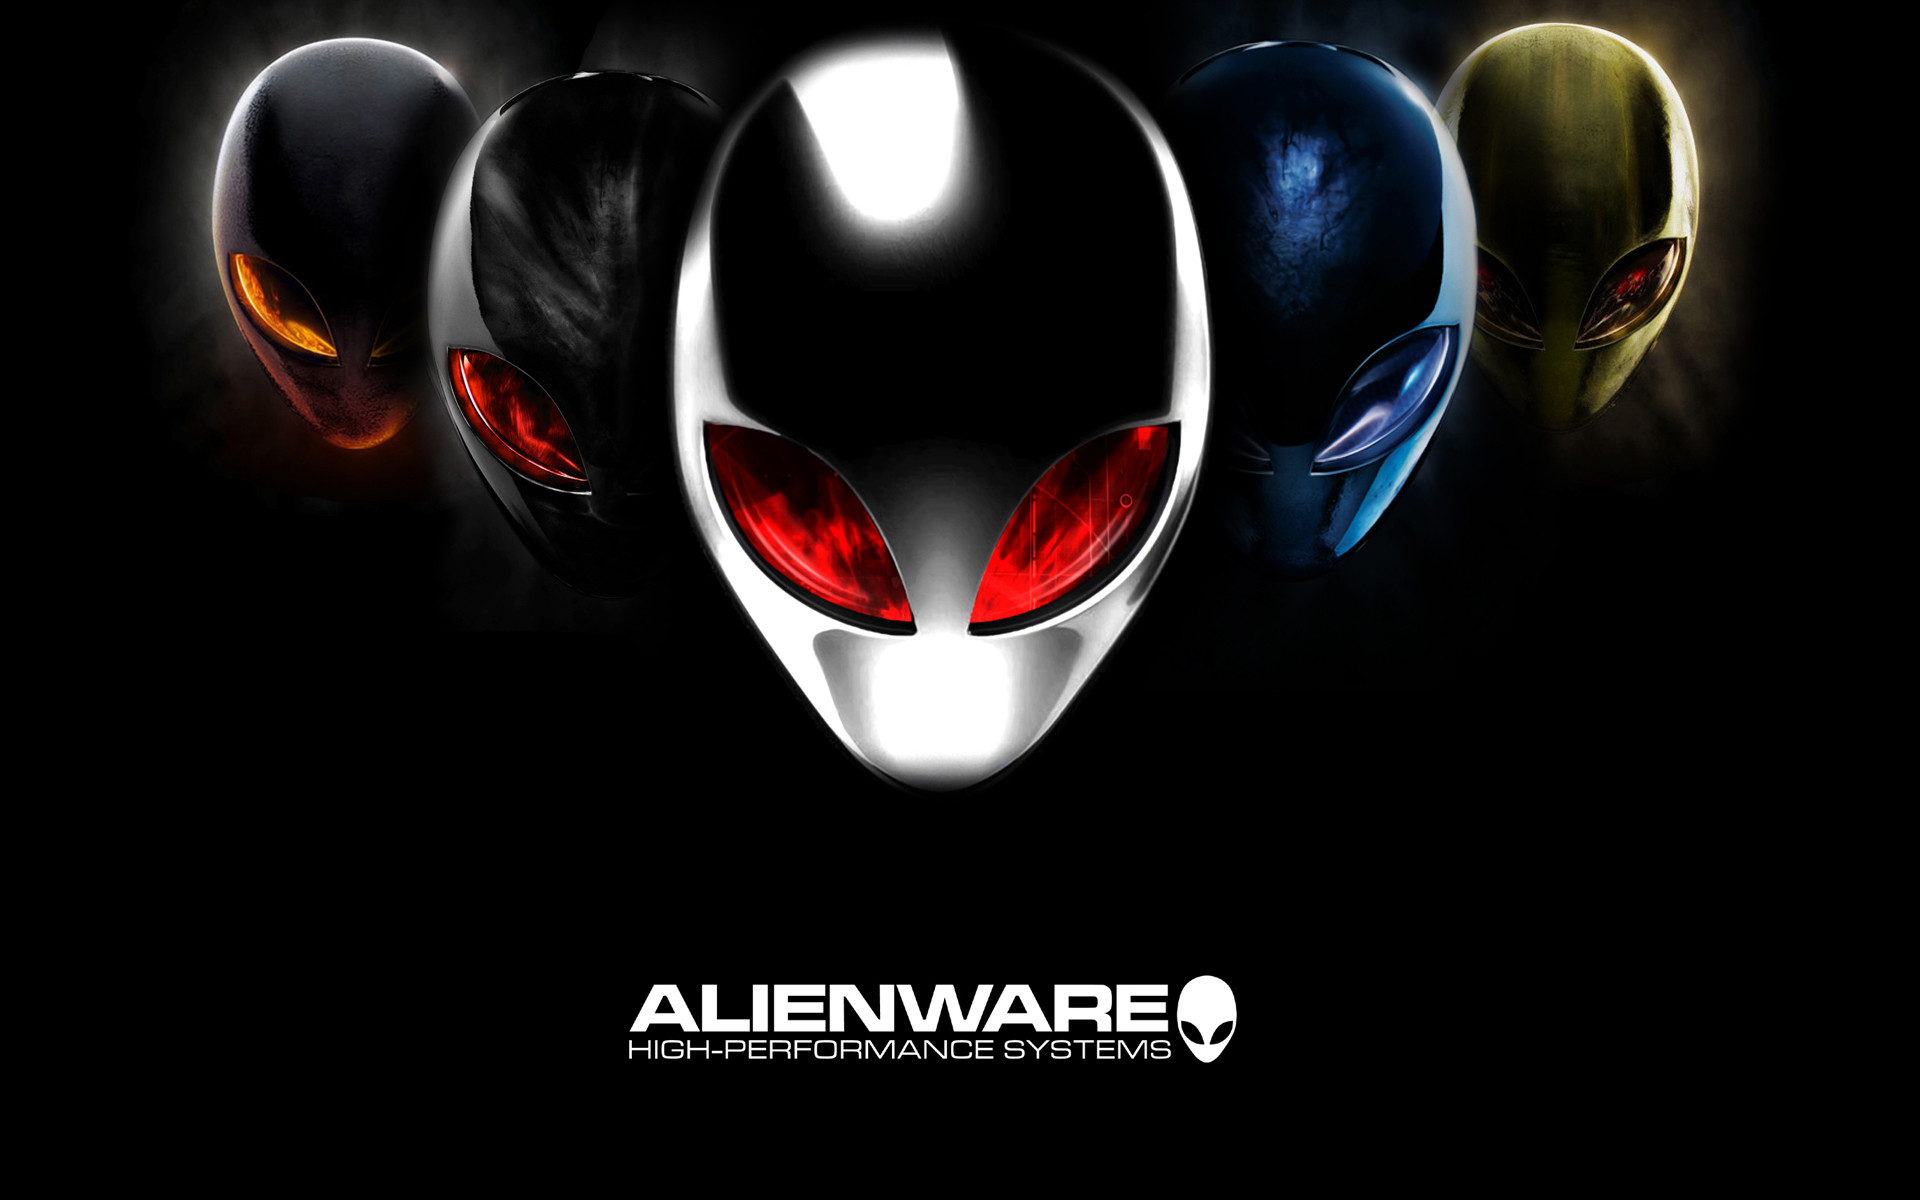 1920x1200 Alienware Images On Wallpaper Hd 1920 x 1200 px 692.31 KB red 1280x1024  green wallappers